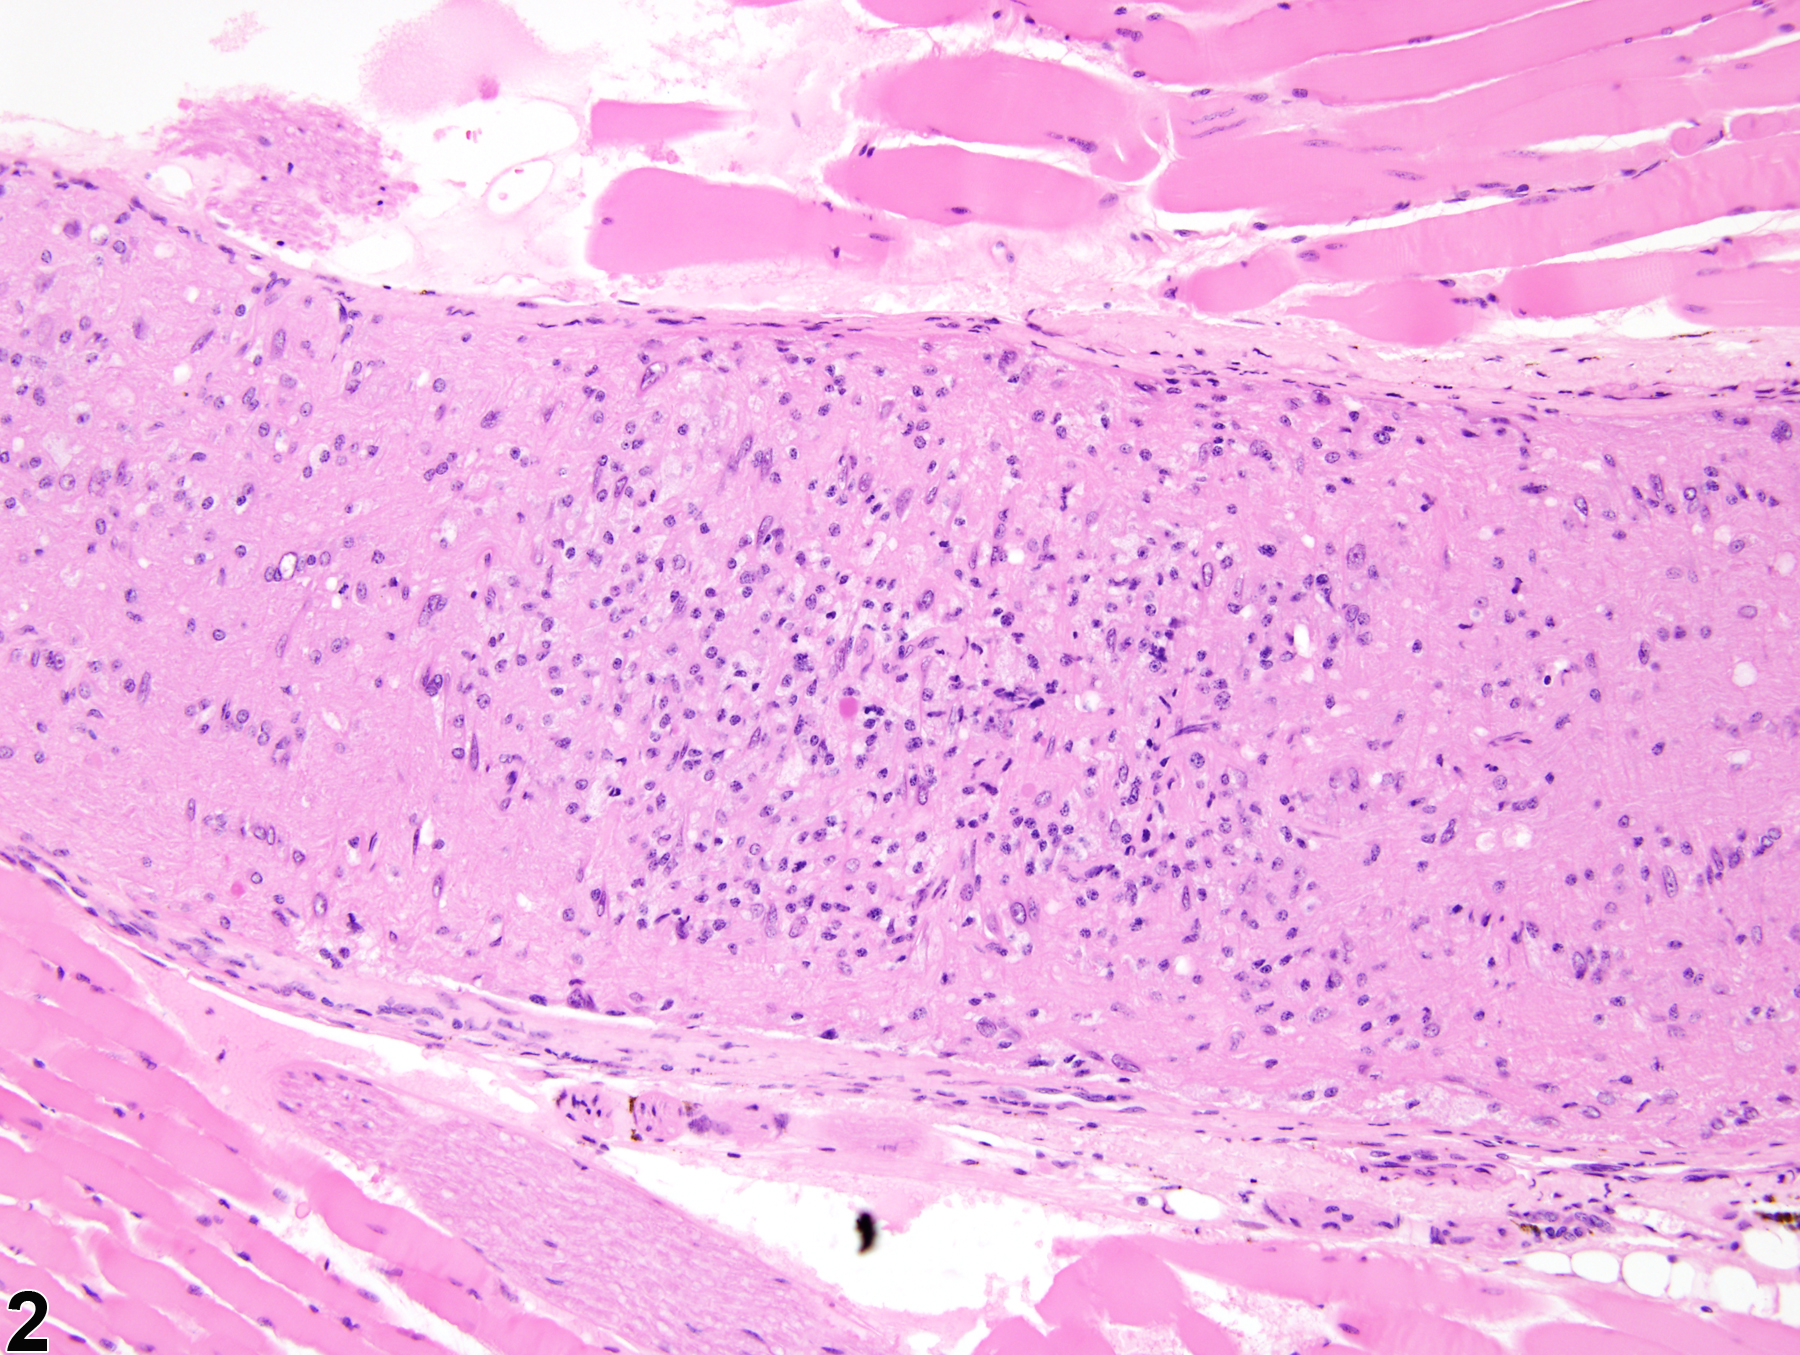 Image of optic nerve gliosis in the eye from a male B6C3F1 mouse in a chronic study